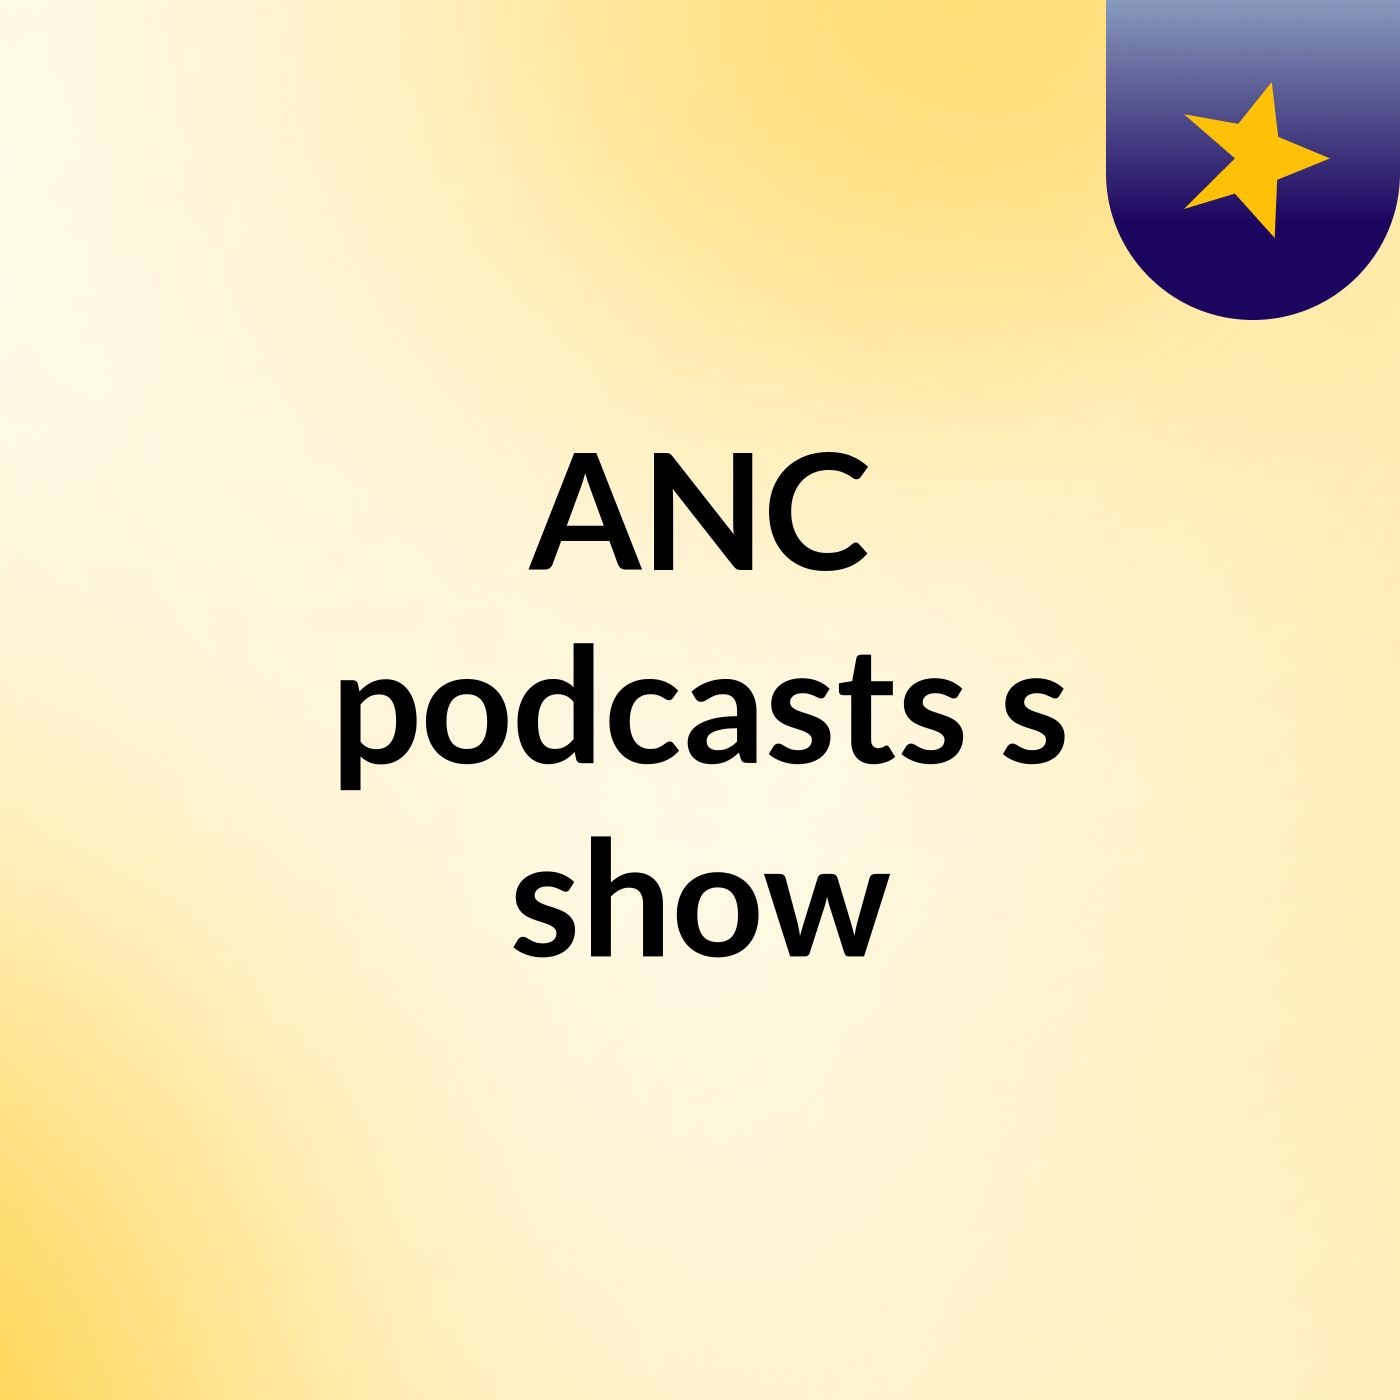 ANC podcasts's show